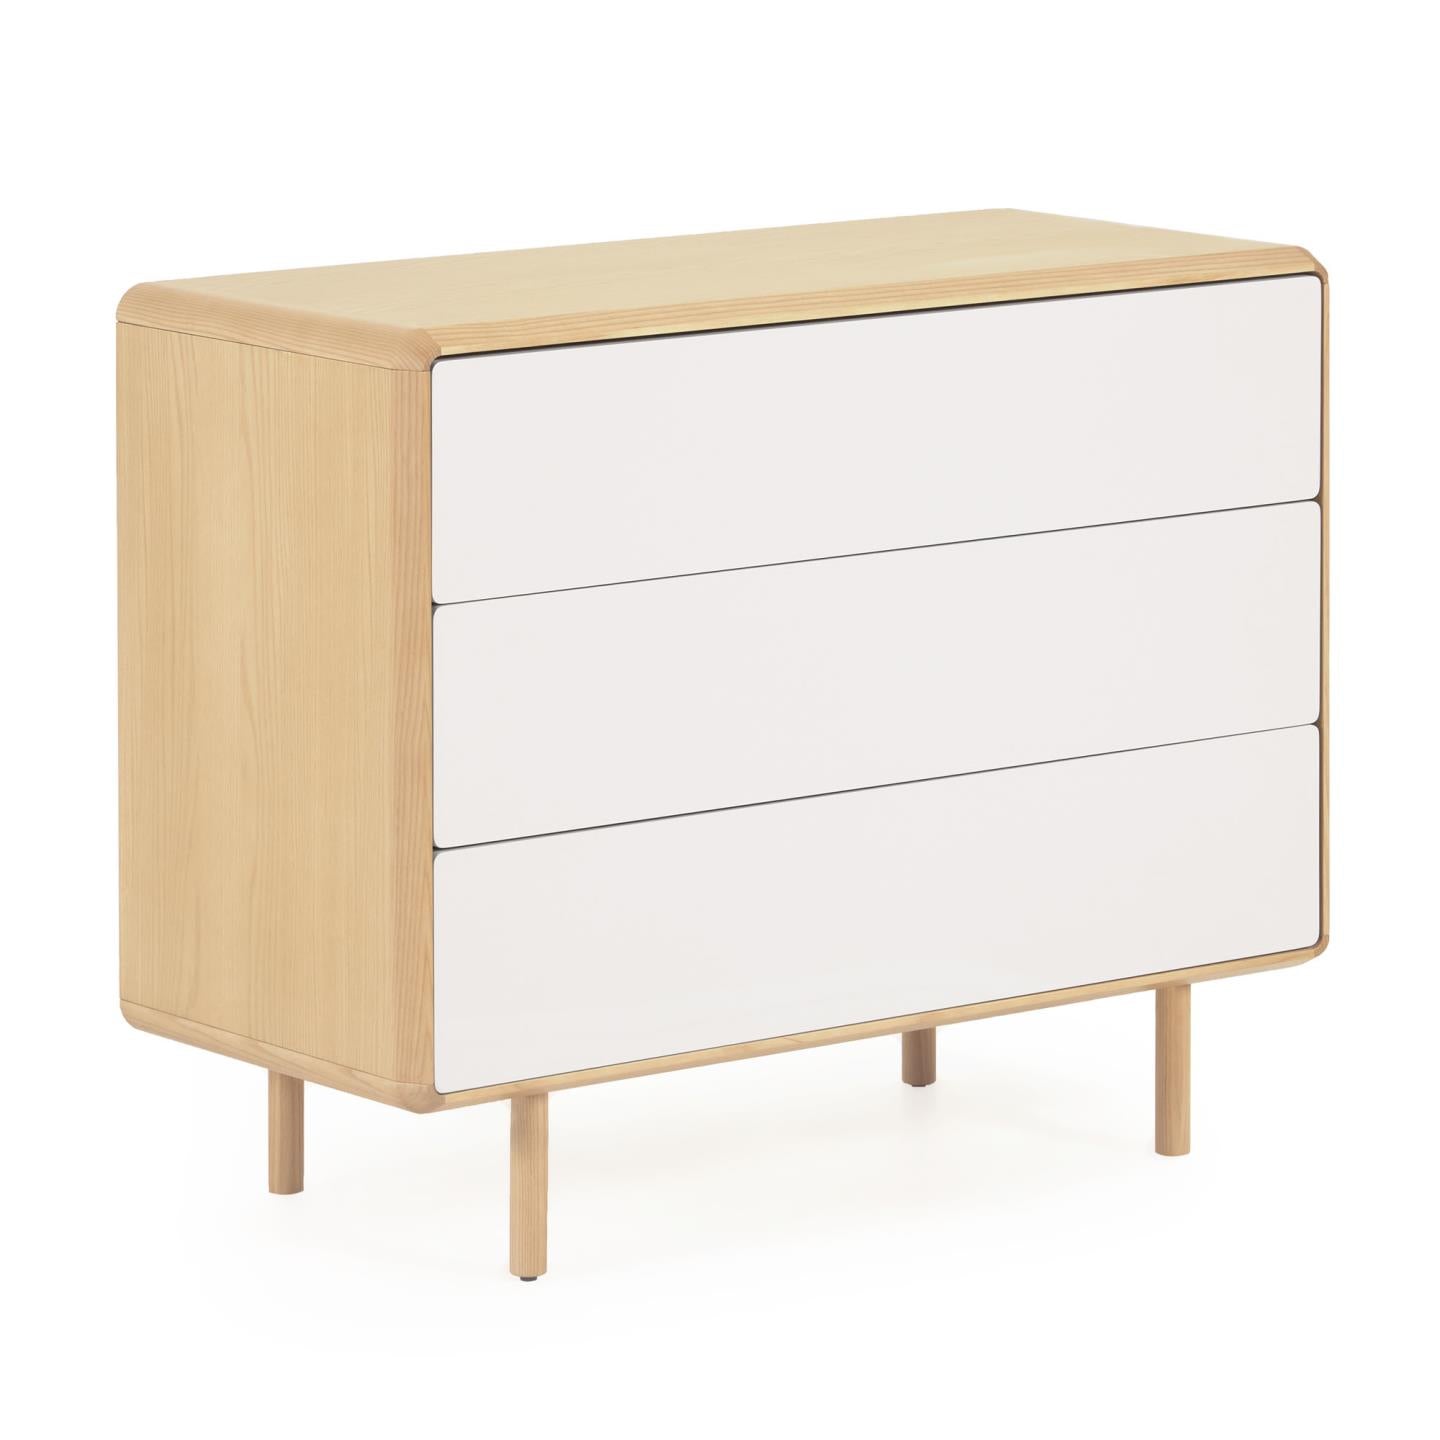 Anielle solid and ash veneer chest of three drawers 99 x 78.5 cm